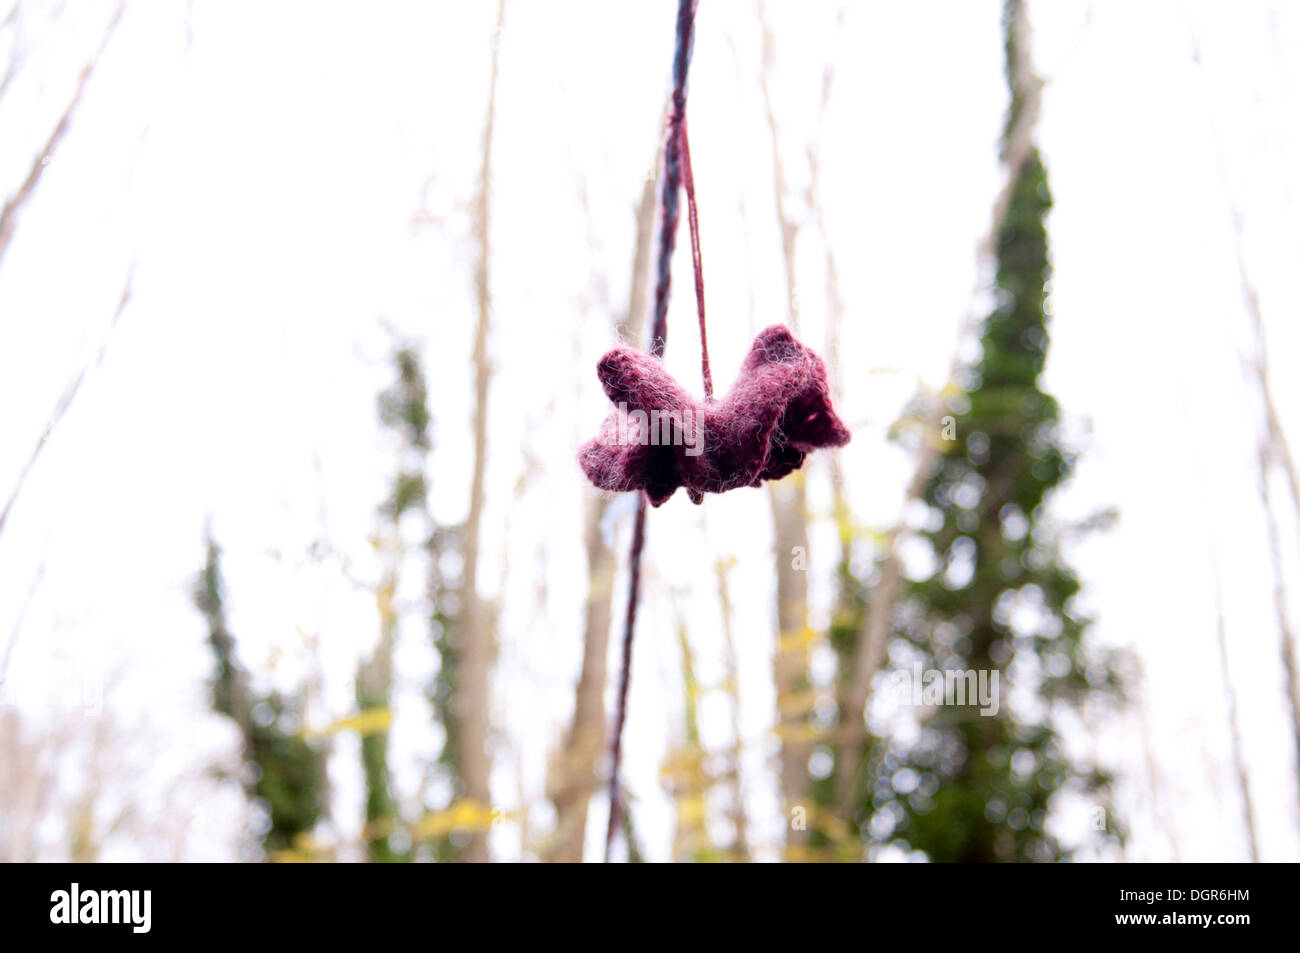 A knitted flower hanging in the forest from a tree. Stock Photo